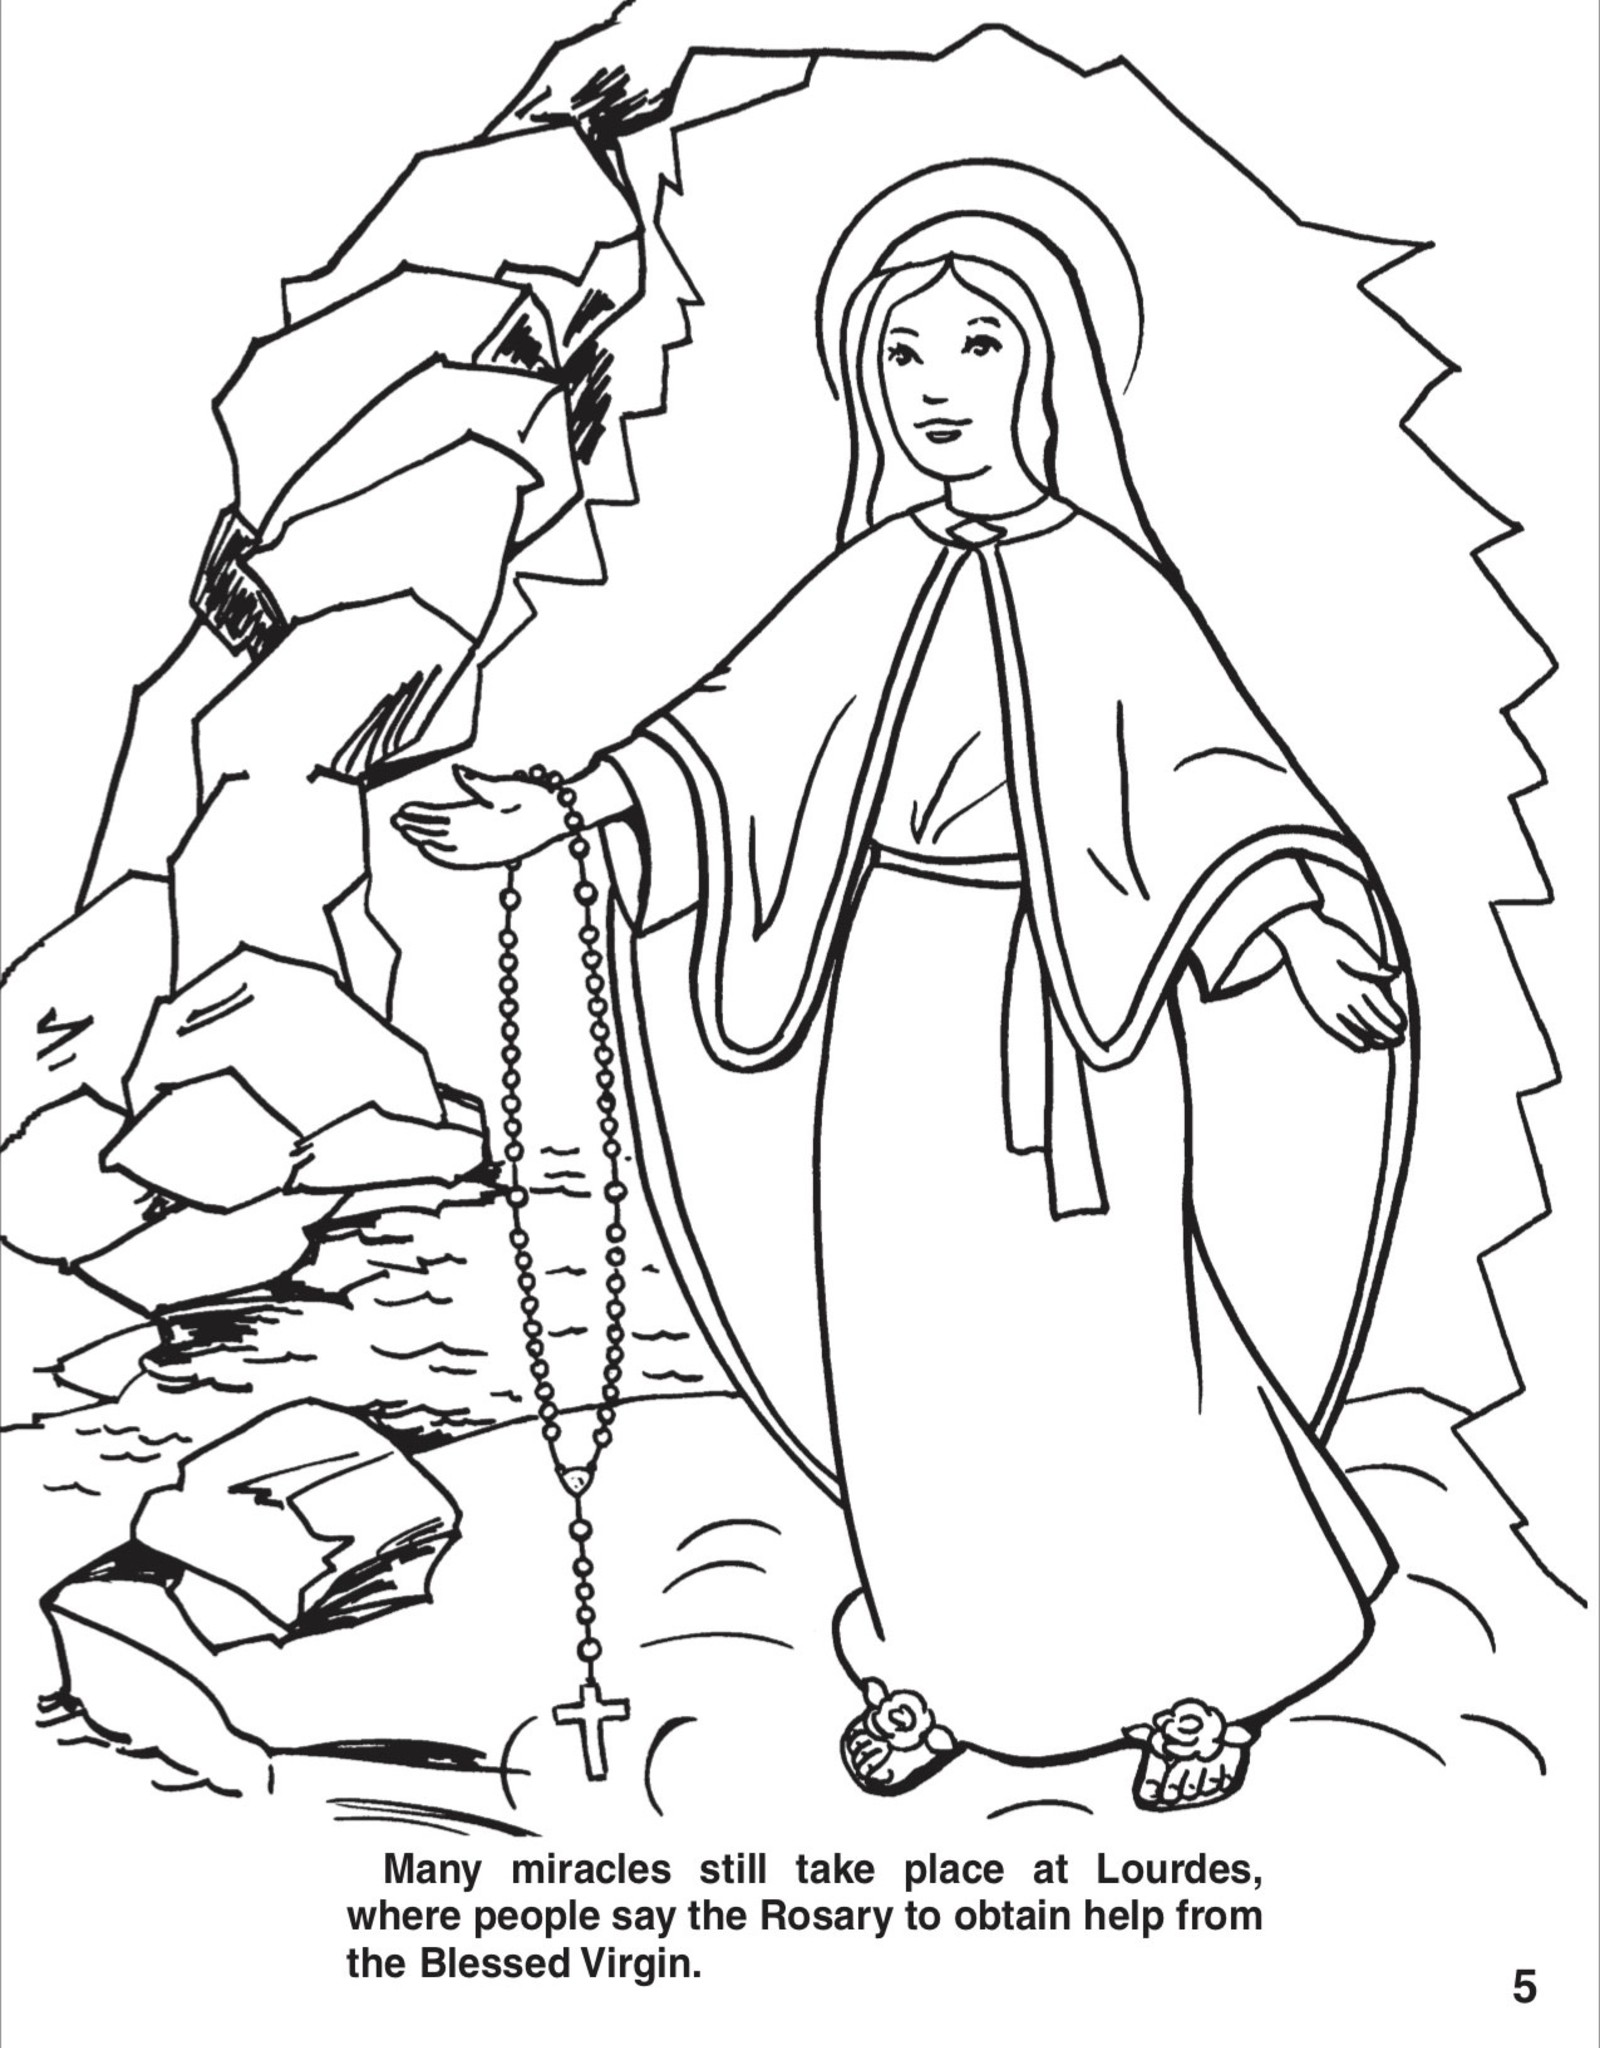 Coloring book about the rosary by lawrence lovasik and pictures by emma mckean